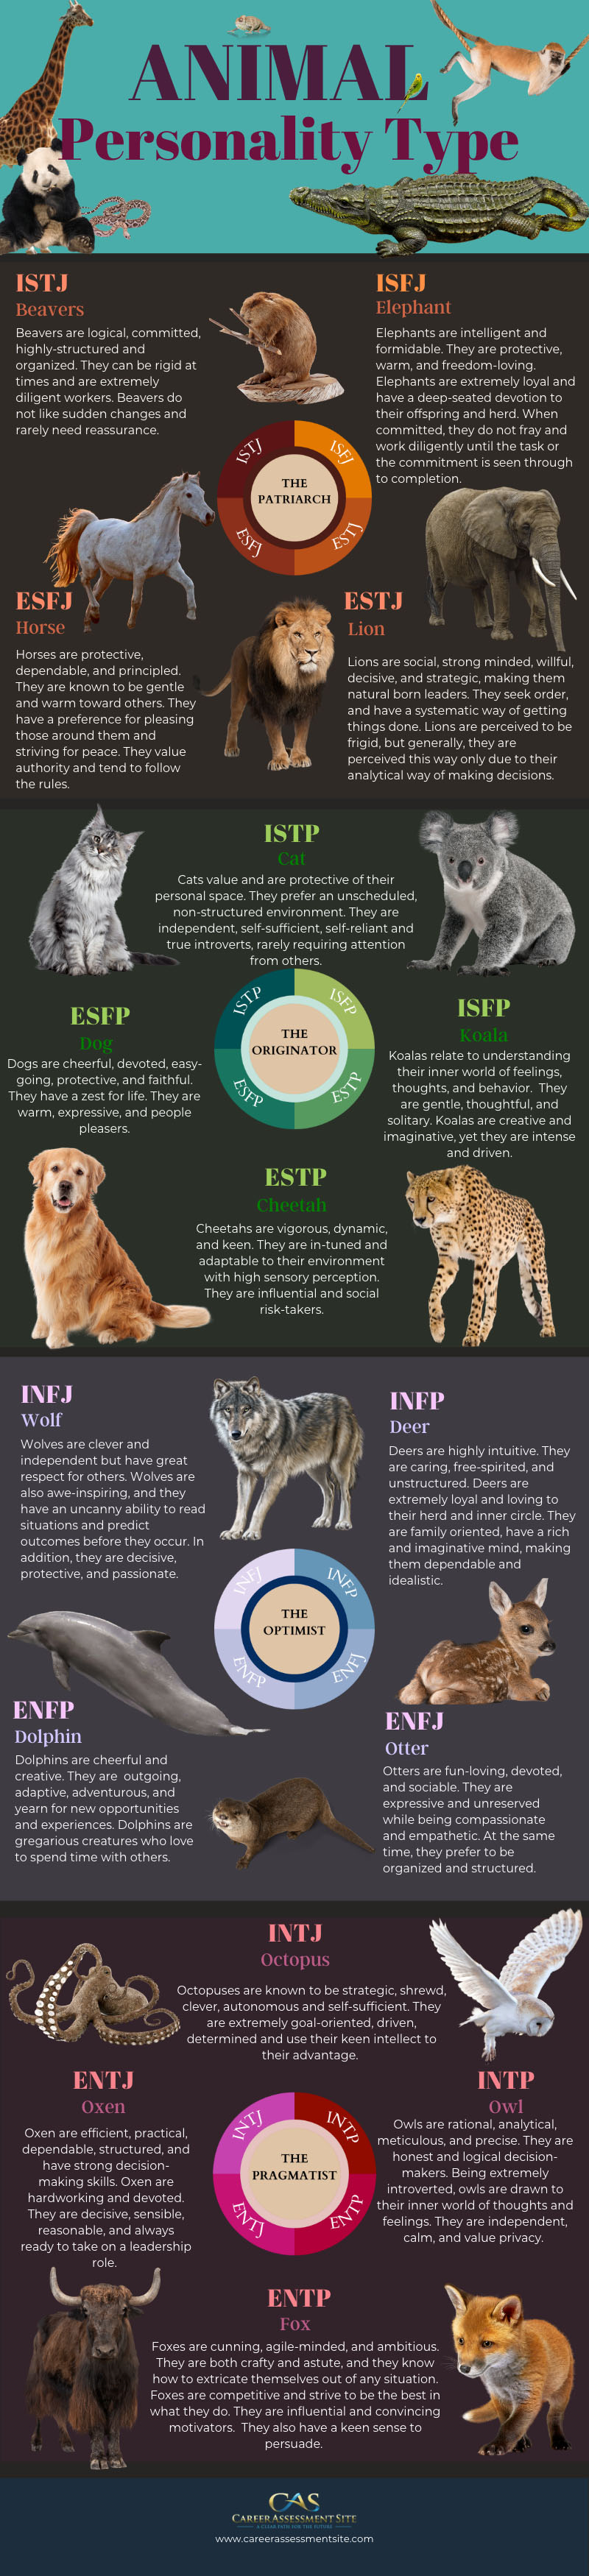 Your Animal Myers-Briggs Personality Type